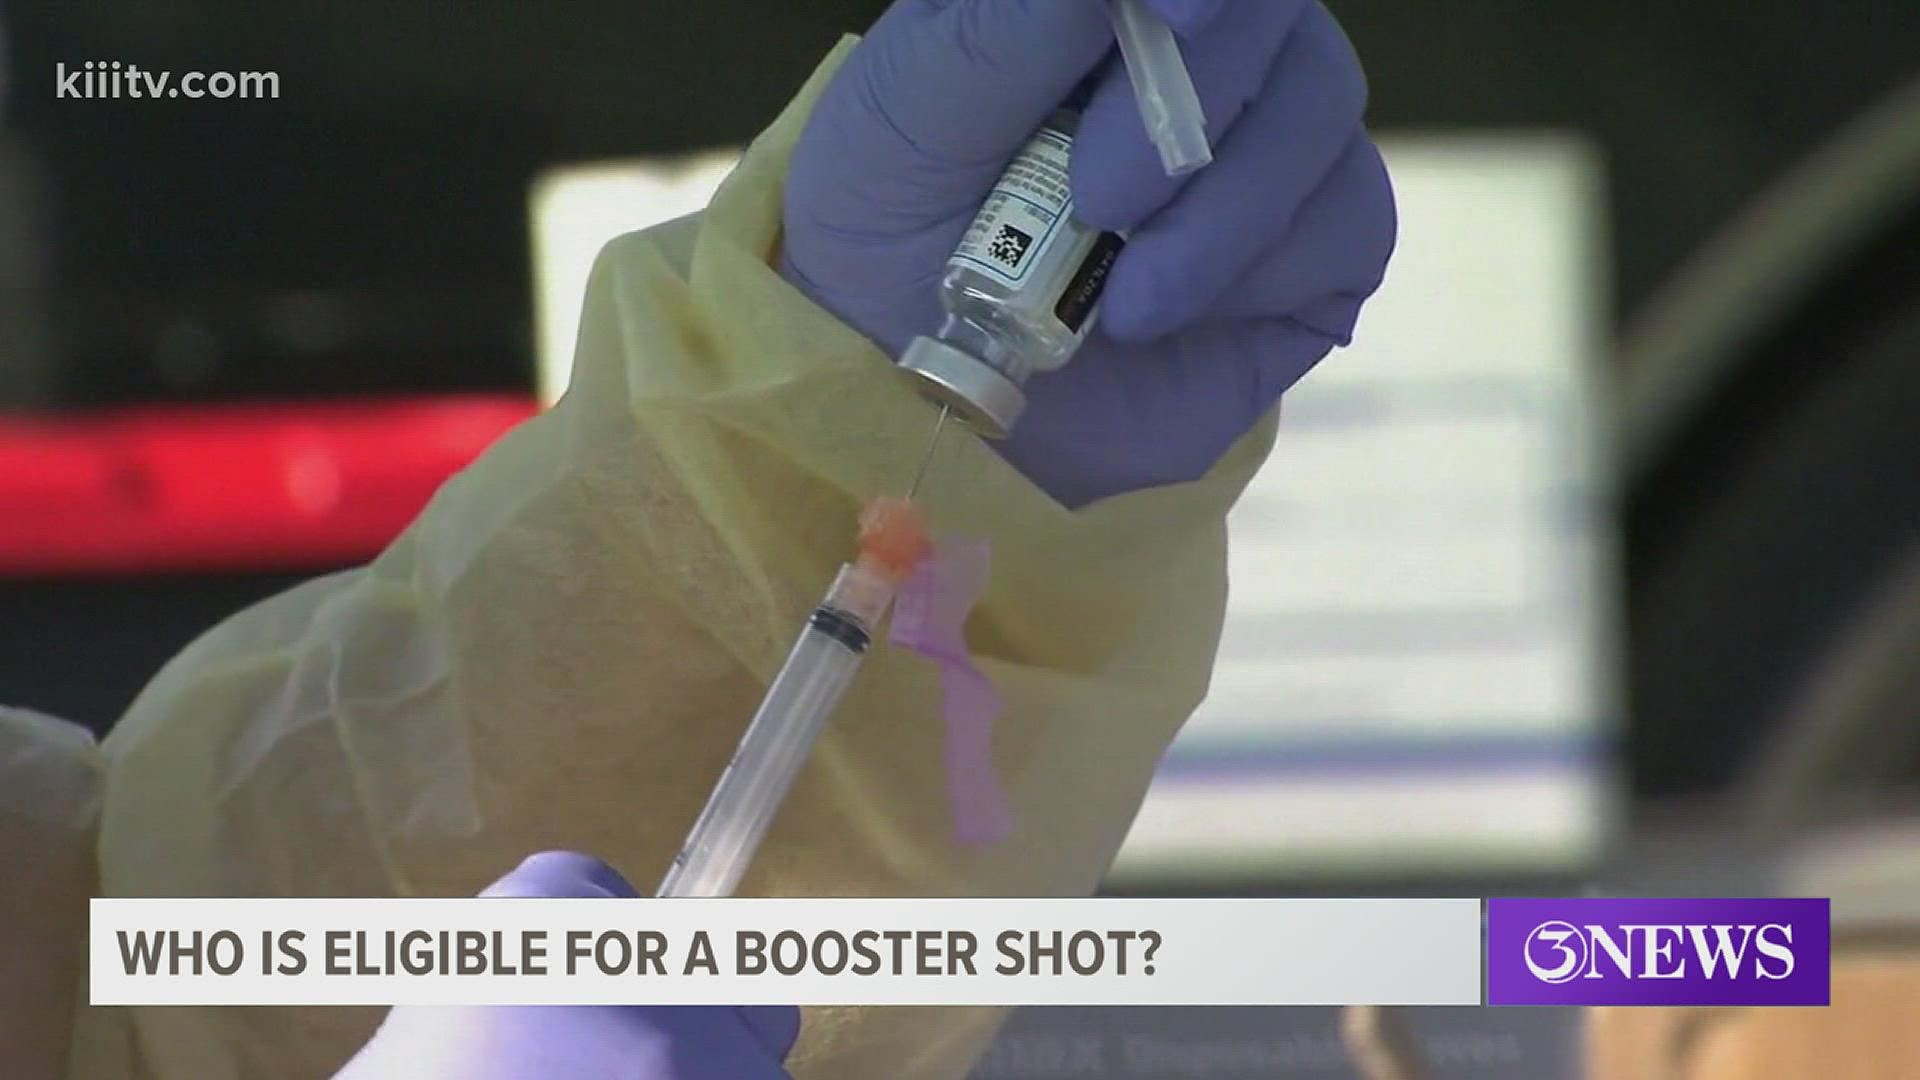 You are eligible to get a booster shot if it has been at least two months since you were vaccinated, and you are 18 or older.